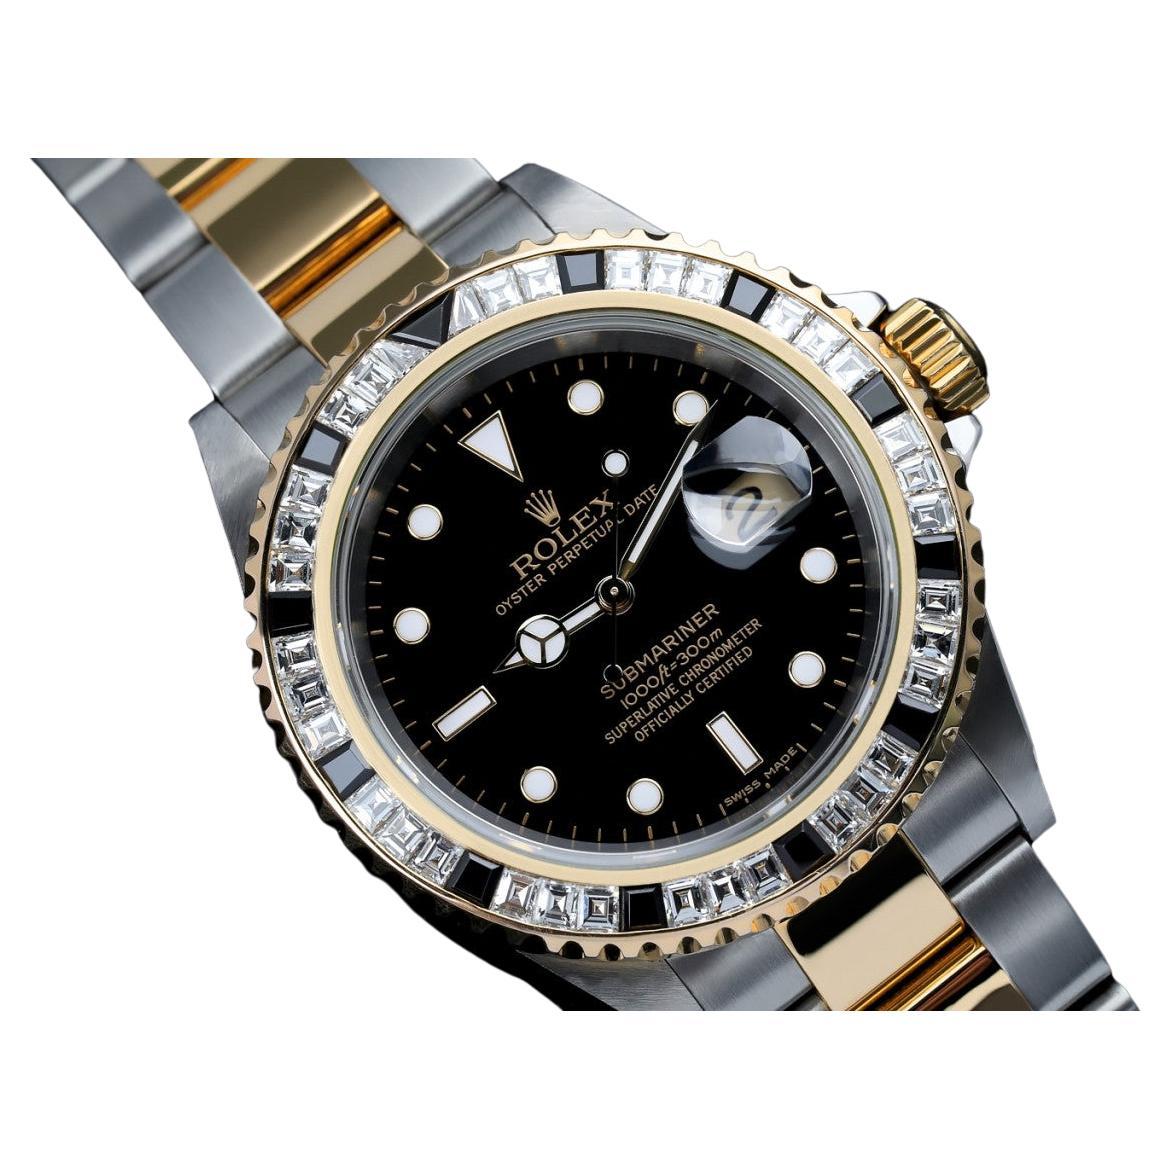 What years was the Submariner 16610 produced?